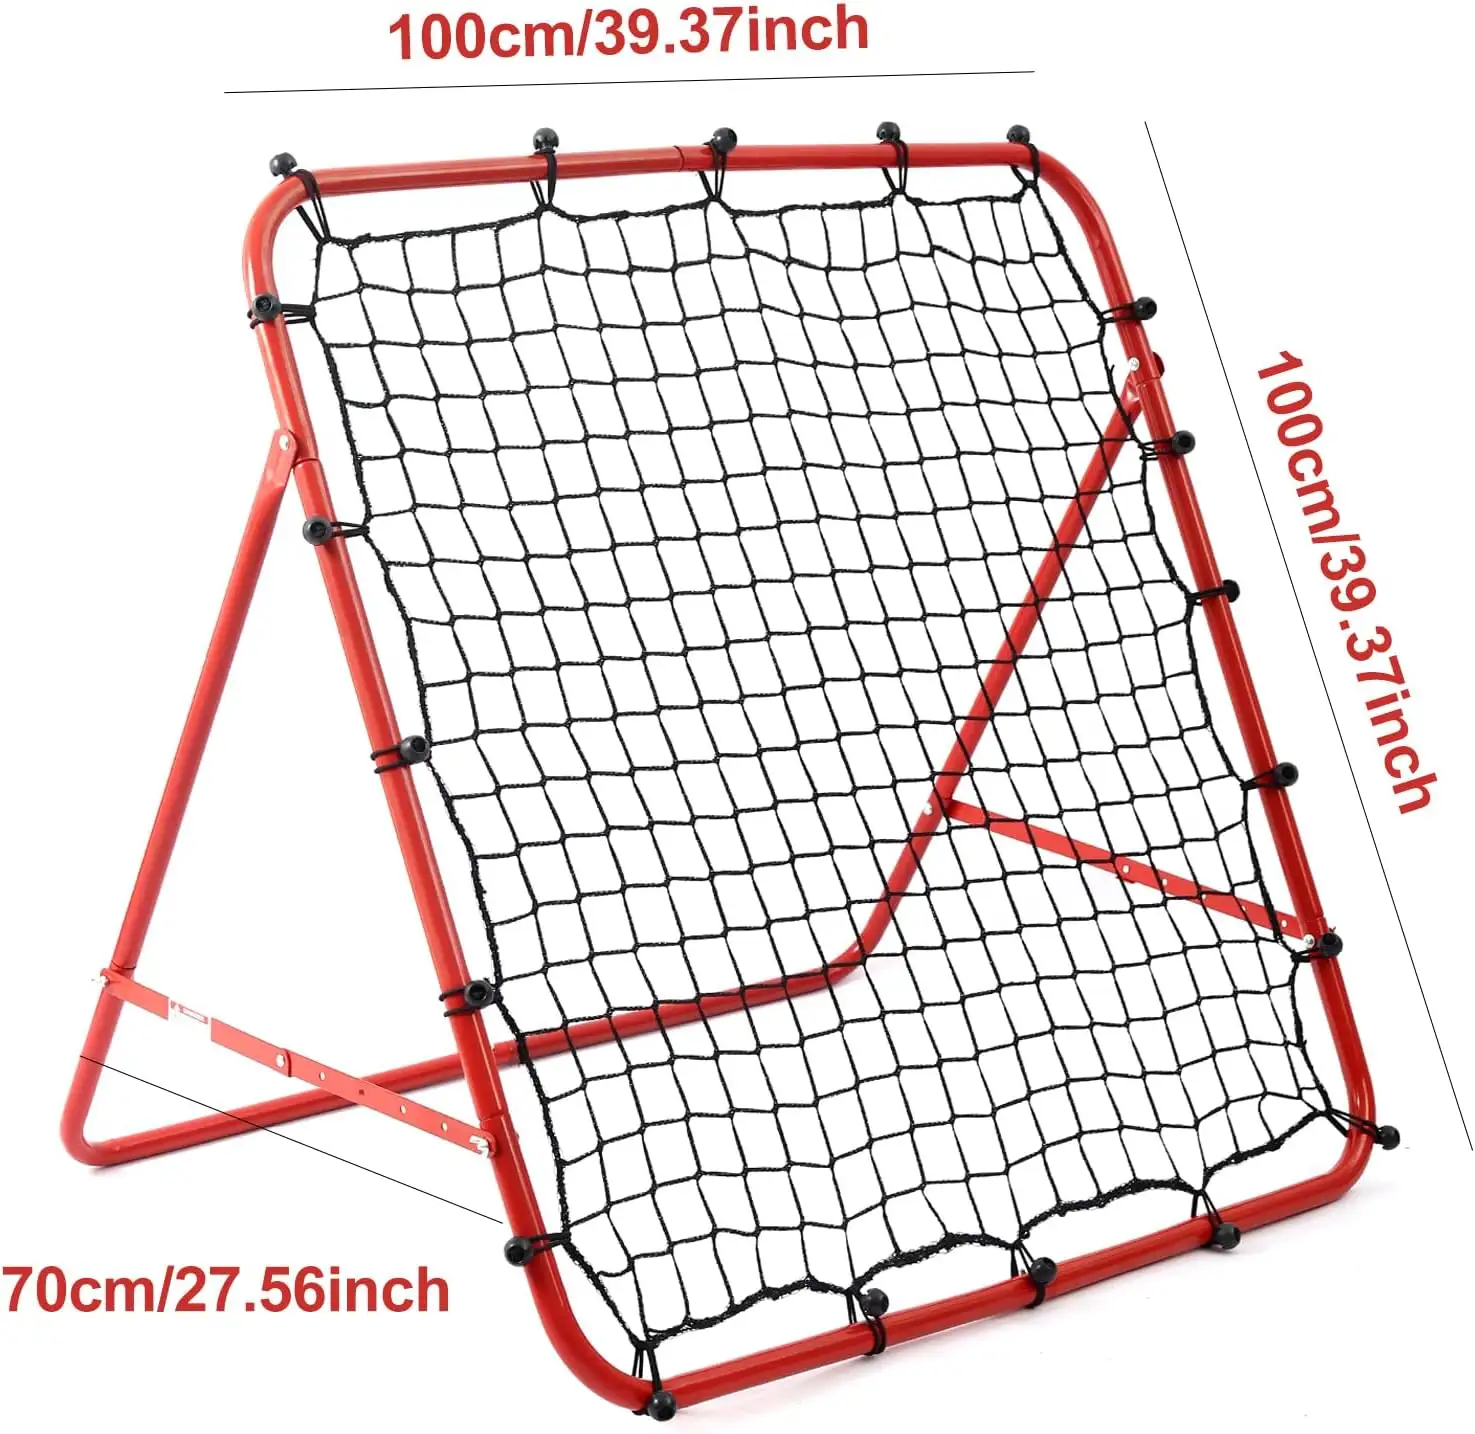 Rebounder Football Rebound Net Sports Bounce Wall Made of Steel Frame Red